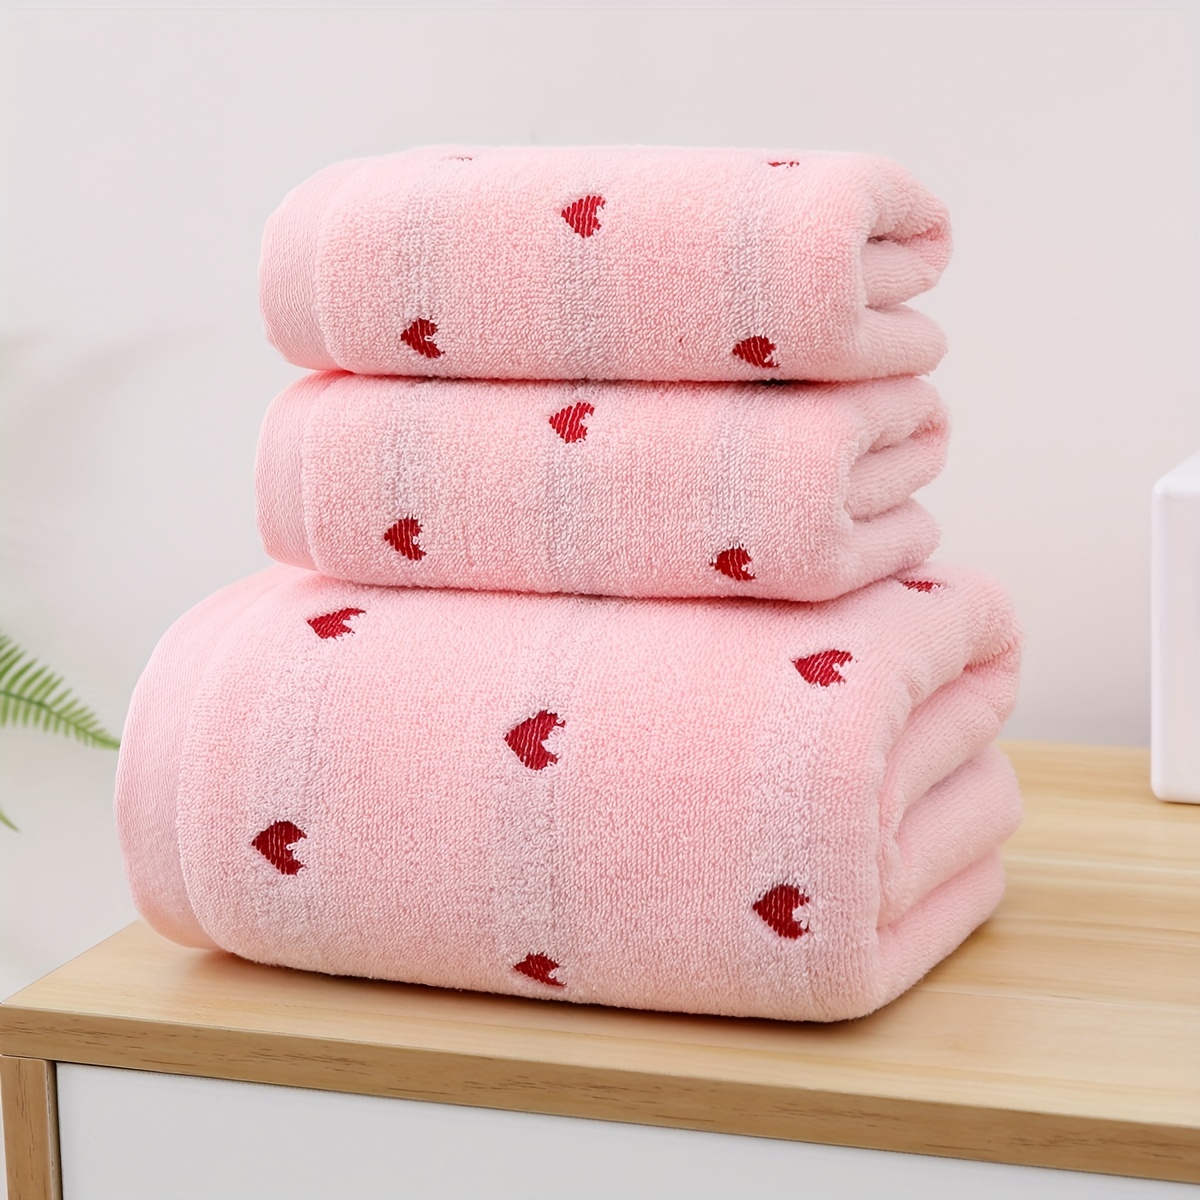 

2pcs Red Heart Embroidered Towel Set - 1 Bath Towel + 1 Hand Towel - Pure Cotton Thickened Absorbent Daily Towels, Valentine's Day Gift, Bathroom Supplies